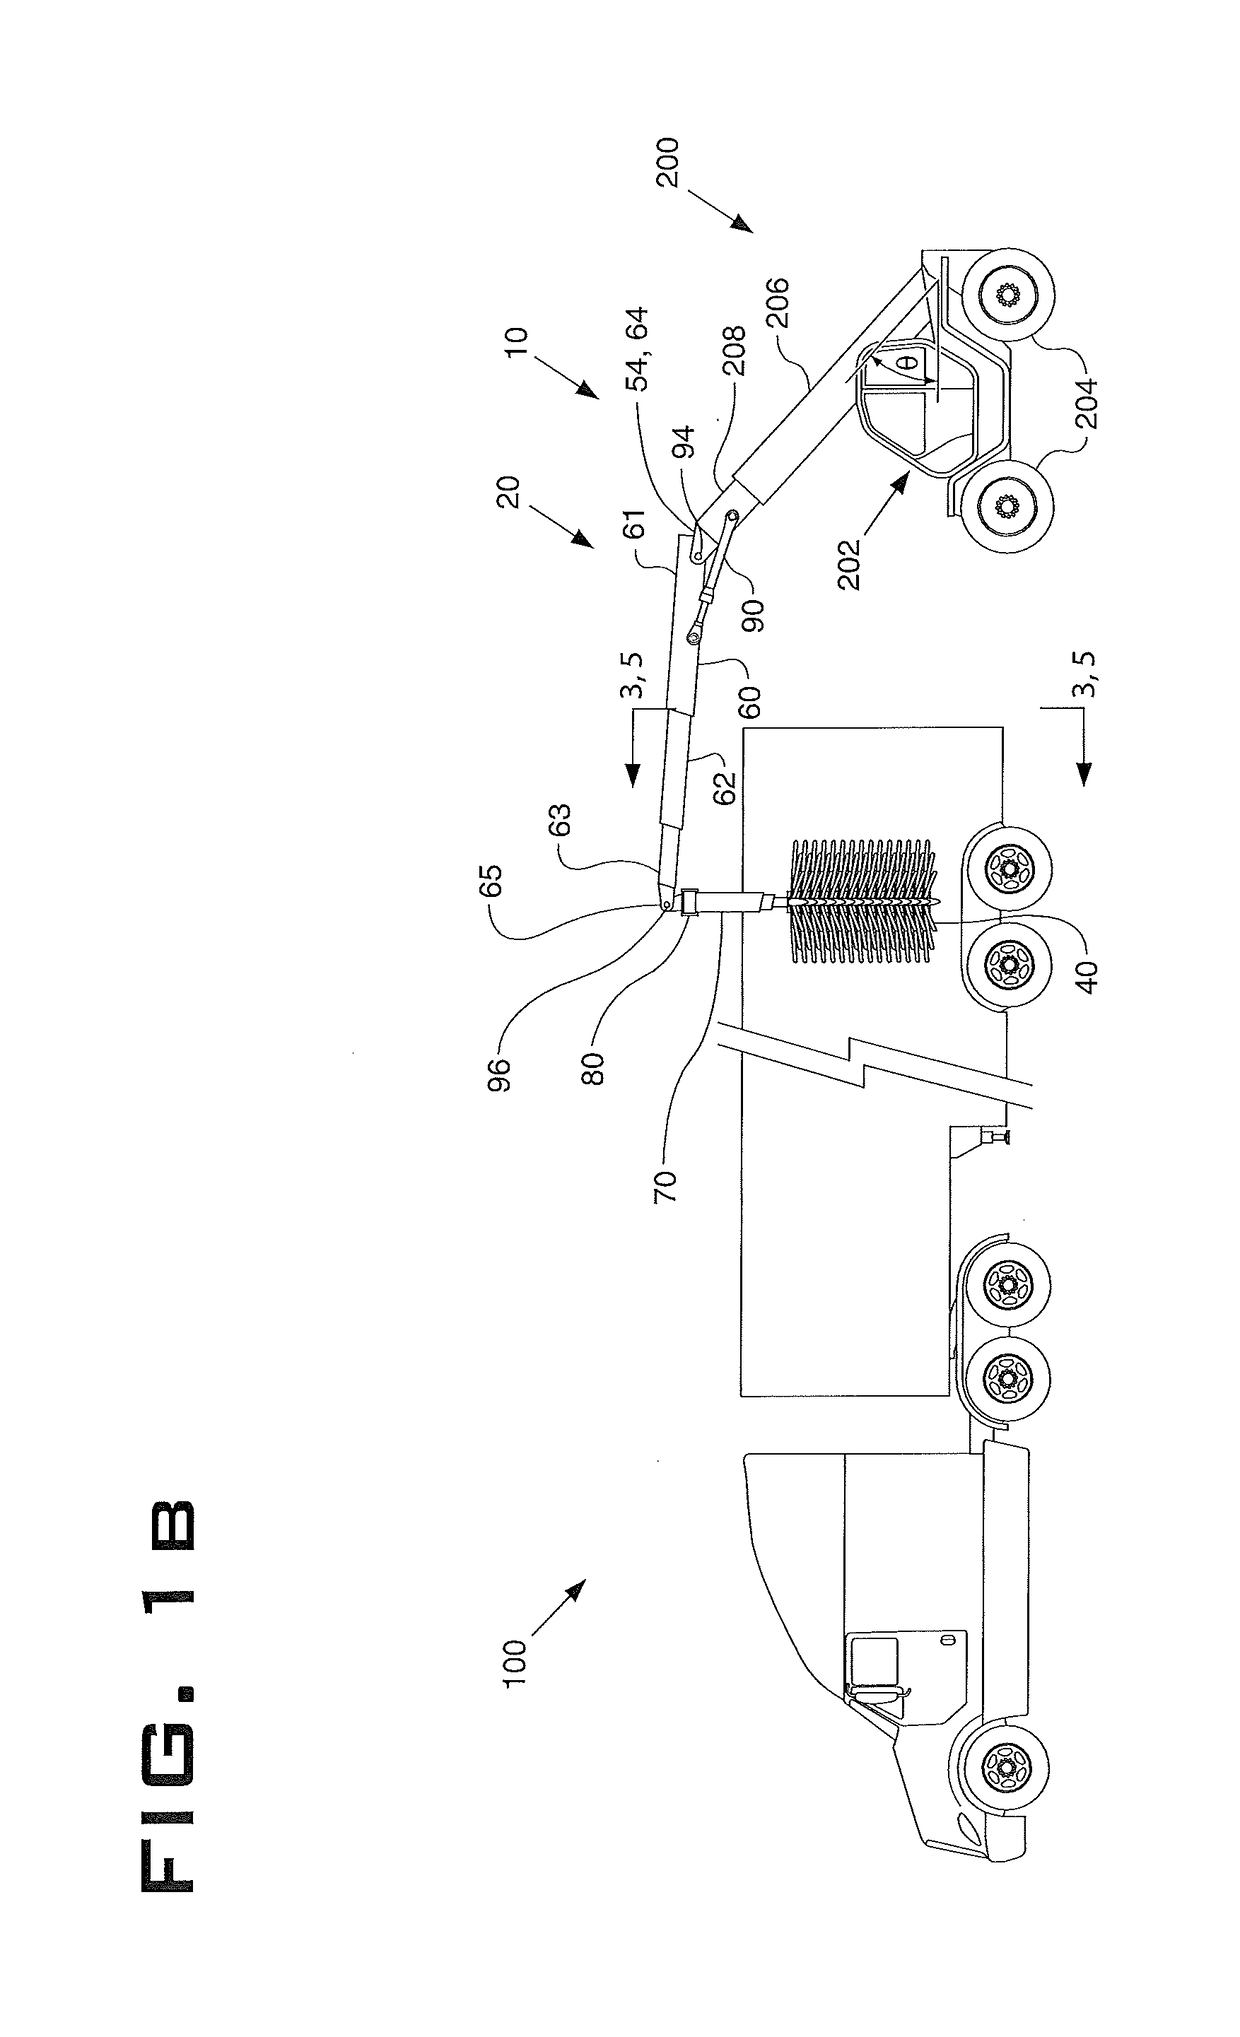 Apparatus and method for cleaning a tractor-trailer